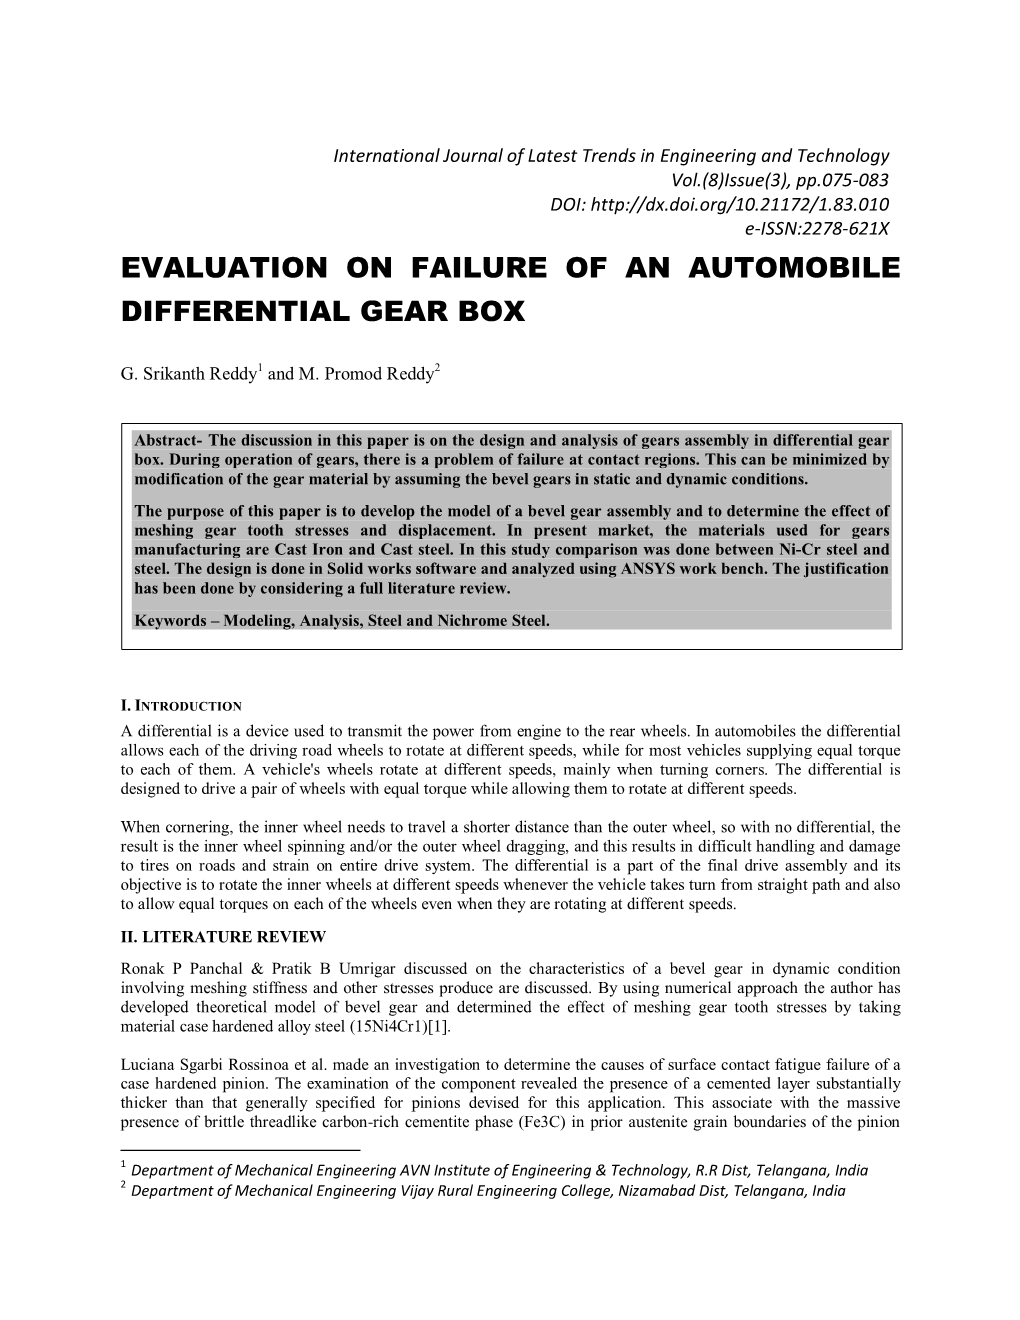 Evaluation on Failure of an Automobile Differential Gear Box